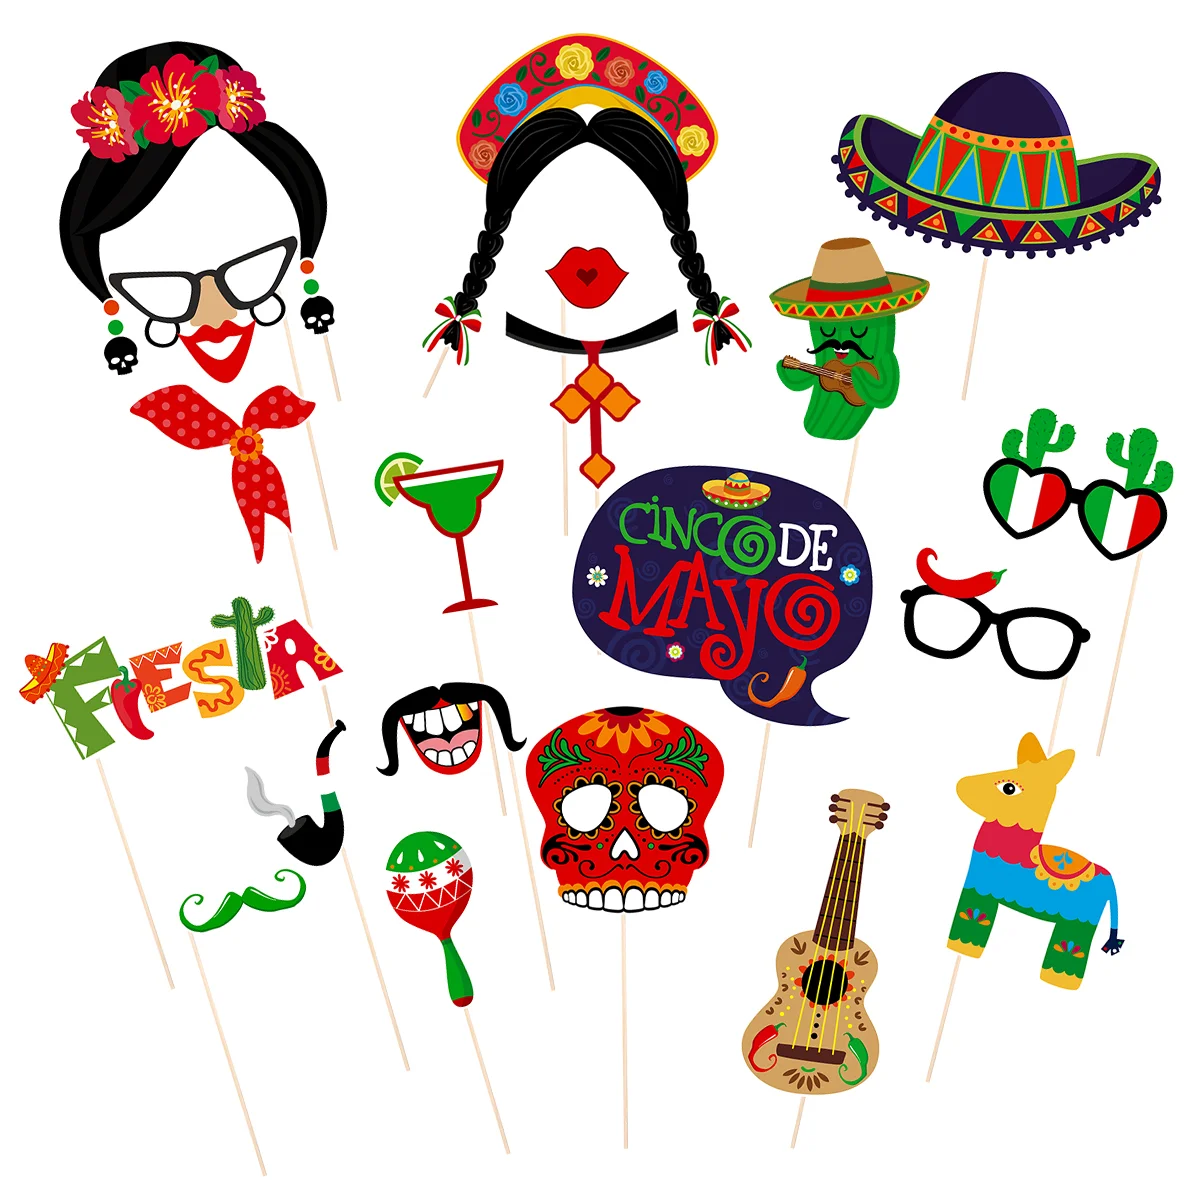 

Photo Props Booth Fiesta Party Mexican De Cinco Mayo Kit Supplies Photobooth Theme Decorations Decoration Wedding Taco Decor